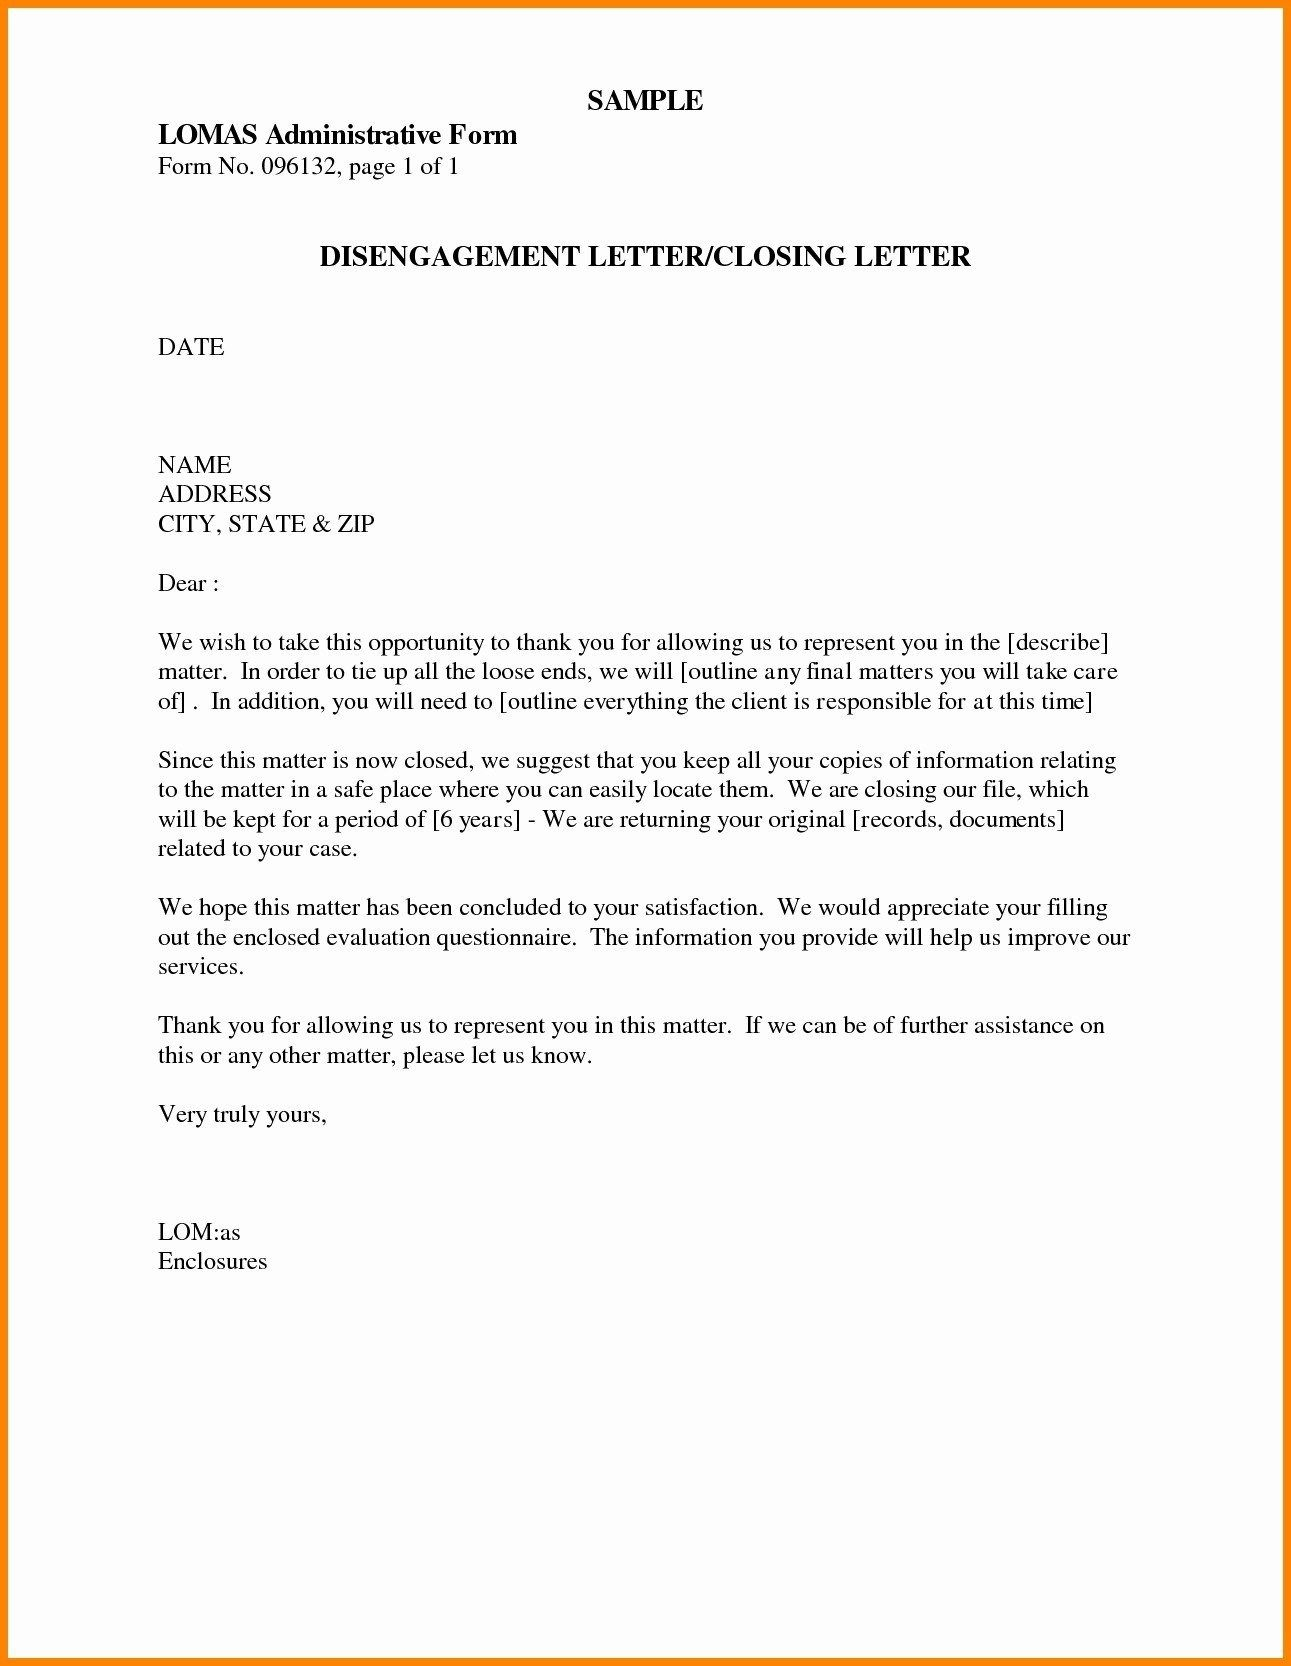 ending-cover-letter-with-enclosure-invitation-template-ideas